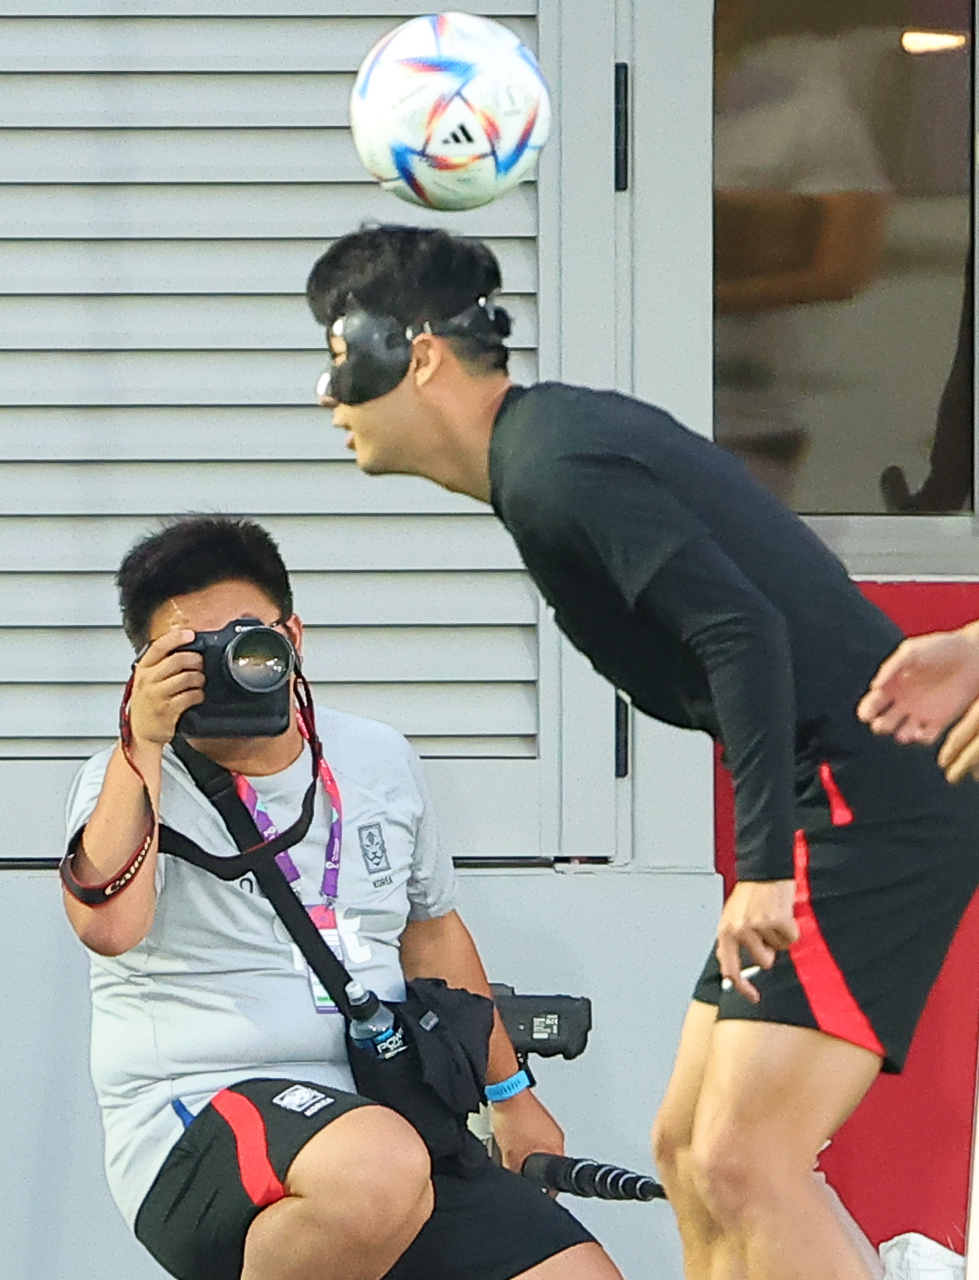 These composite photos show South Korean captain Son Heung-min heading the ball during a training session at Al Egla Training Site in Doha on Monday. (Yonhap)